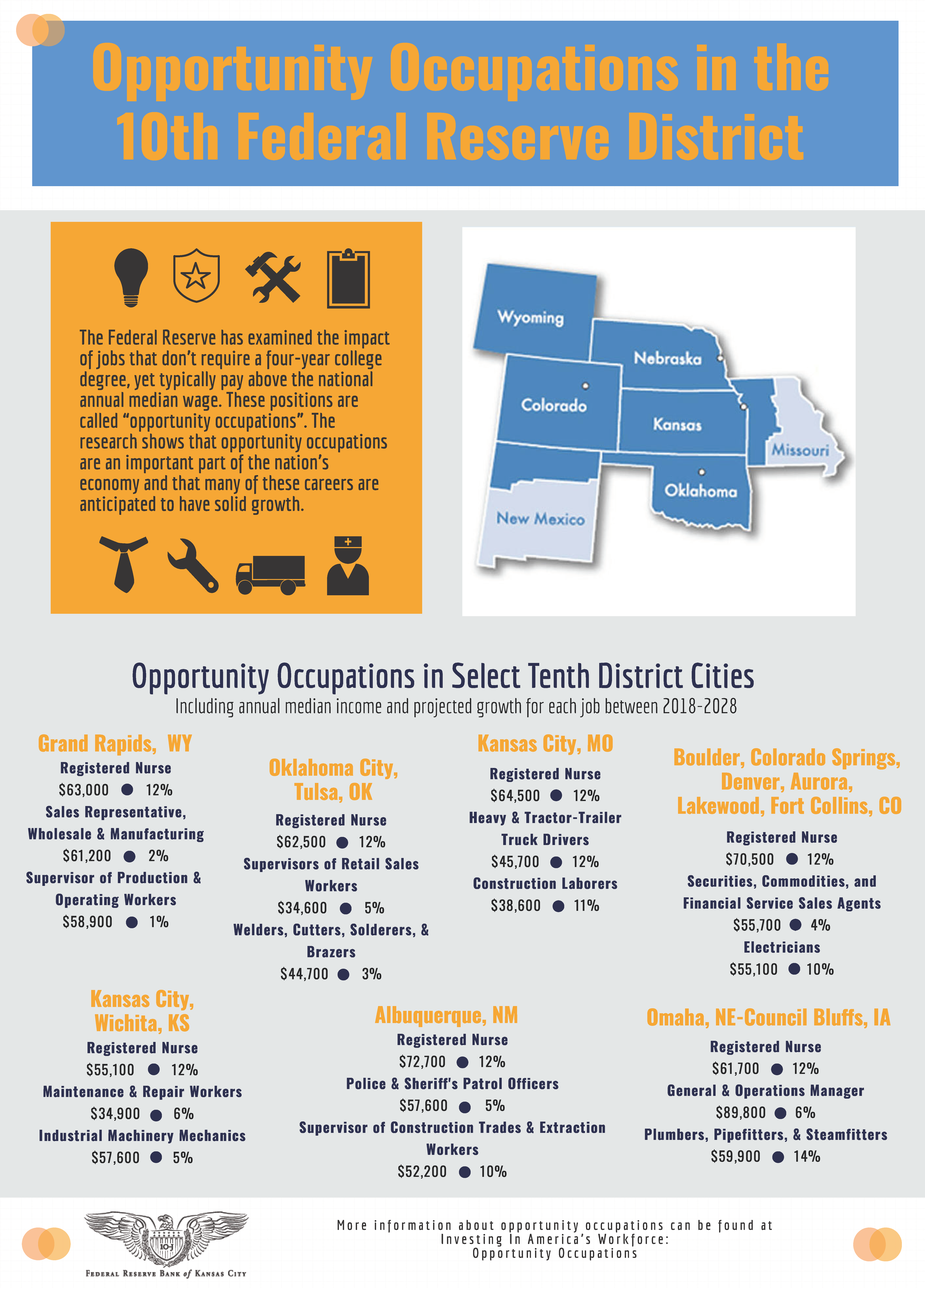 Opportunity Occupations in the 10th Federal Reserve District